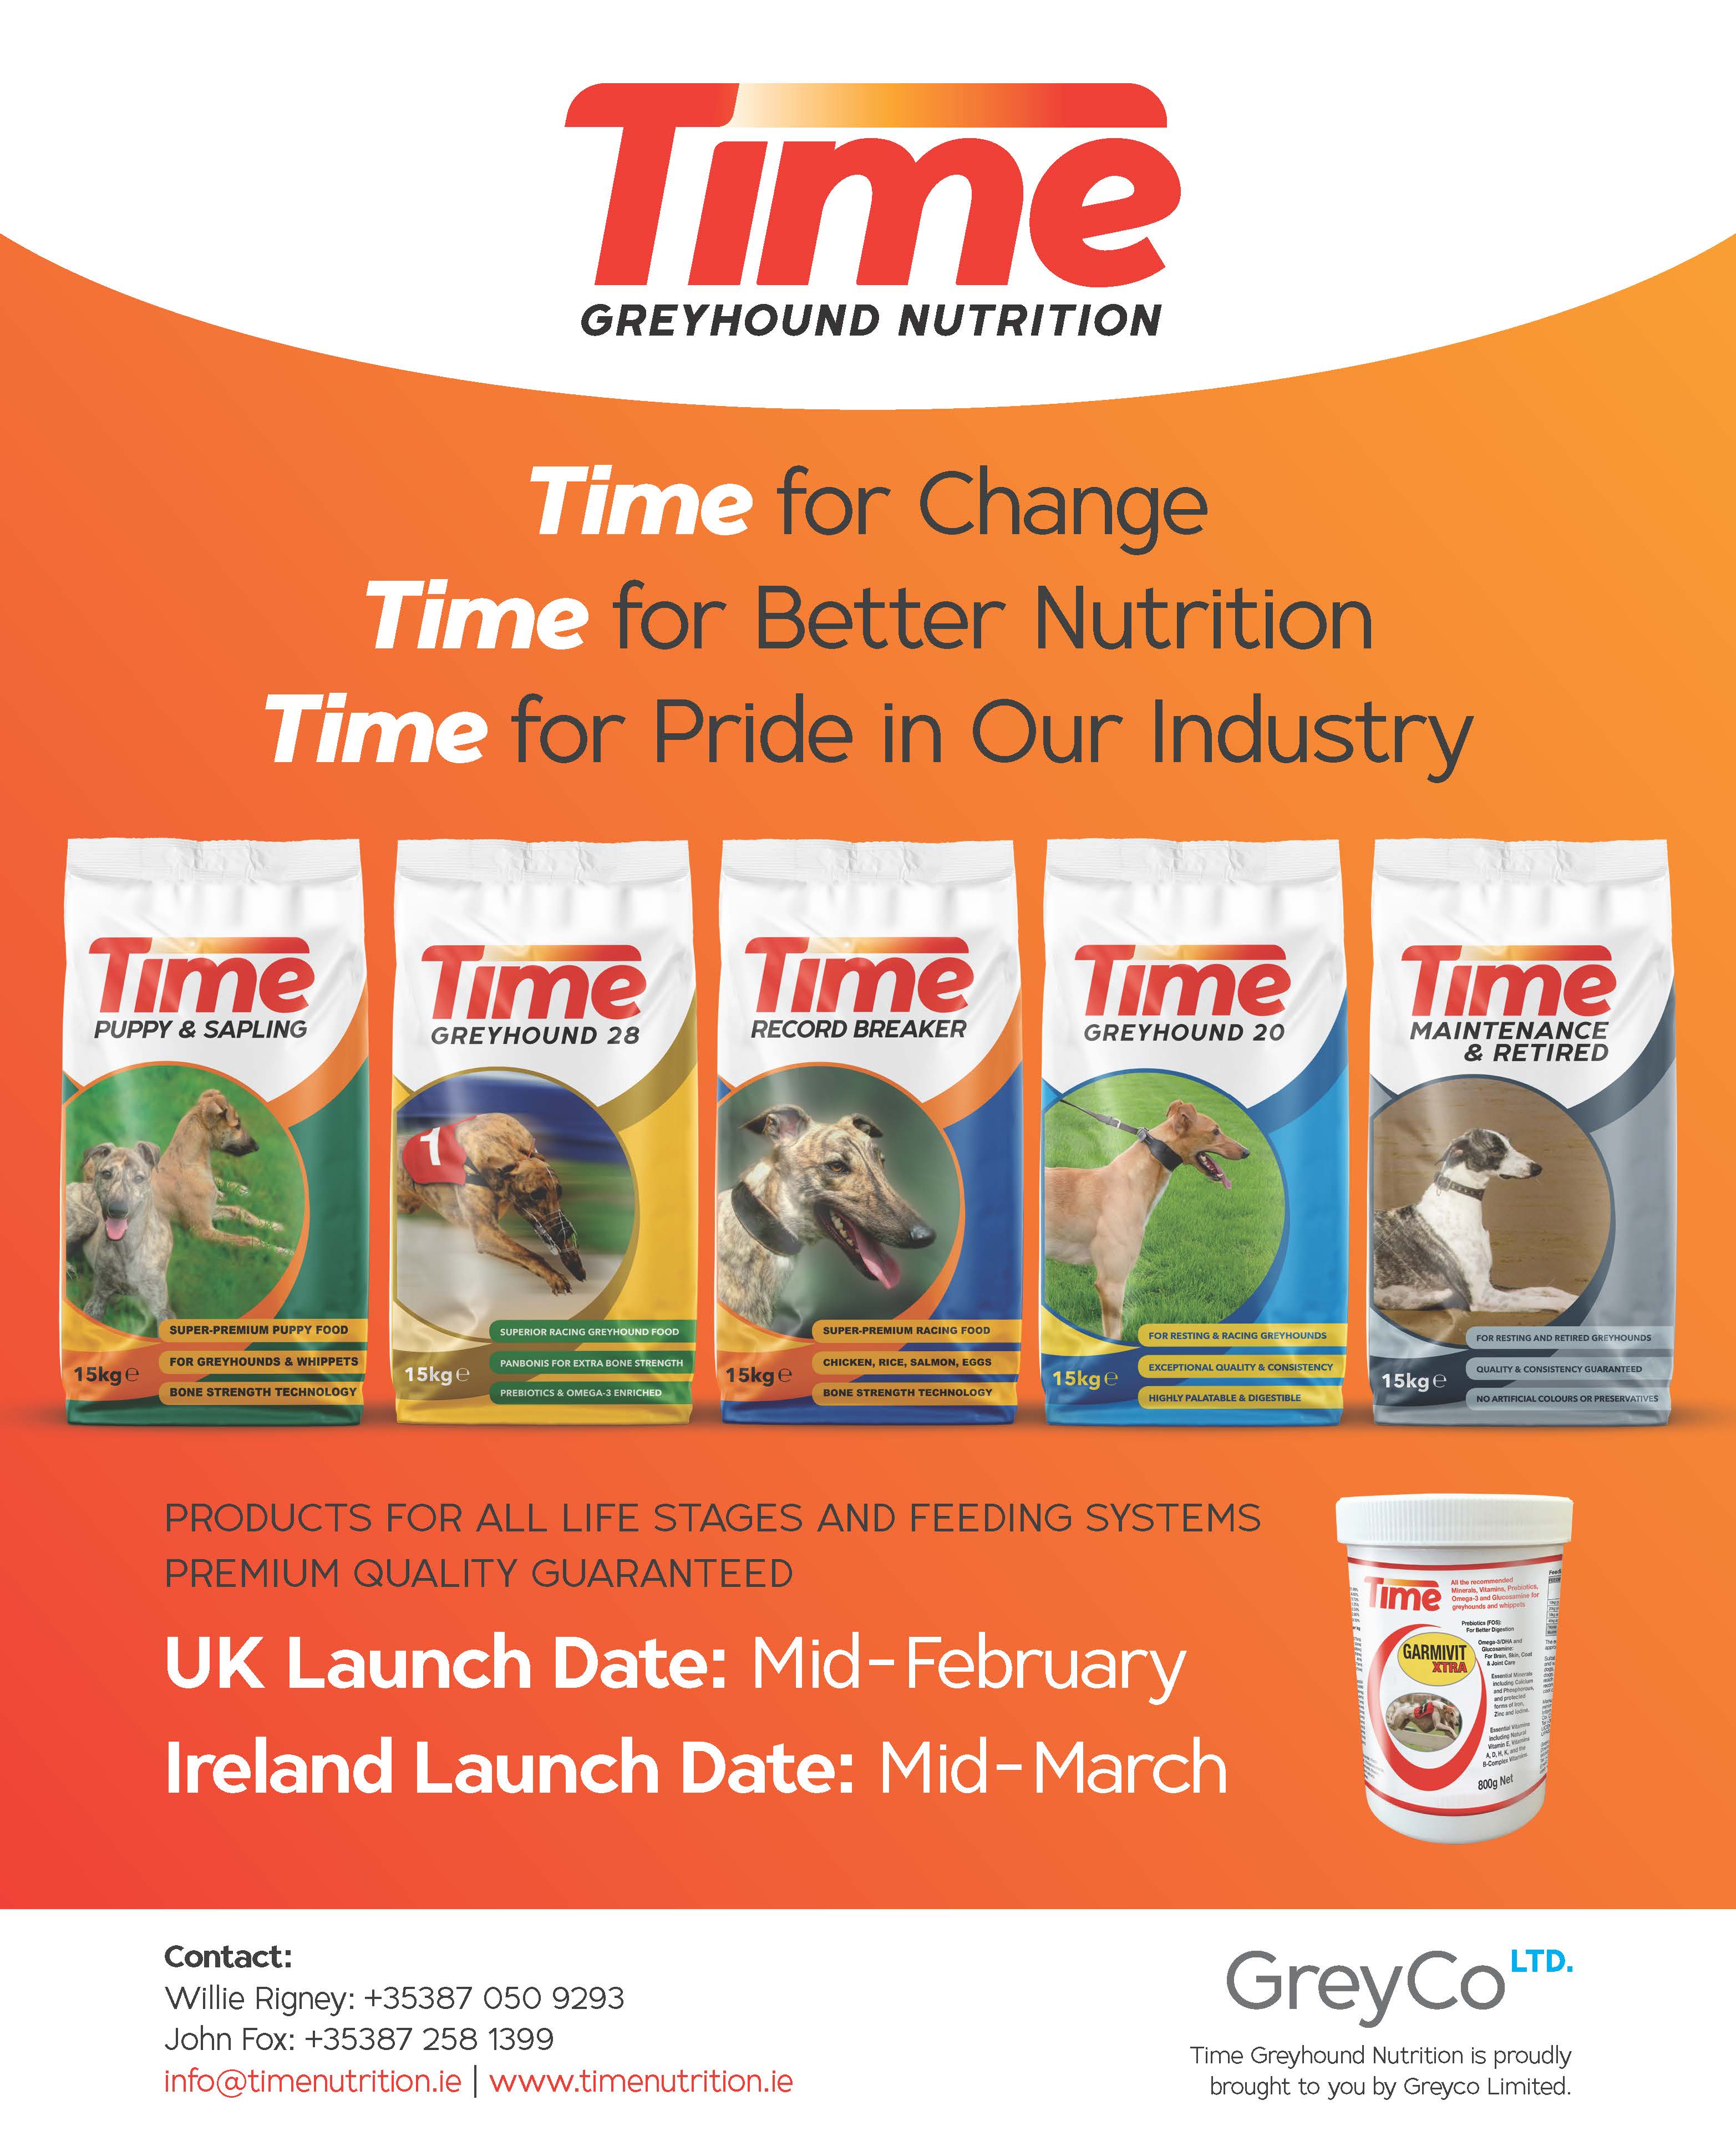 Time, brought to you by GreyCo, have been announced as the new sponsors of the Cork Cup. The greyhound feed product is due to launch to market very soon.